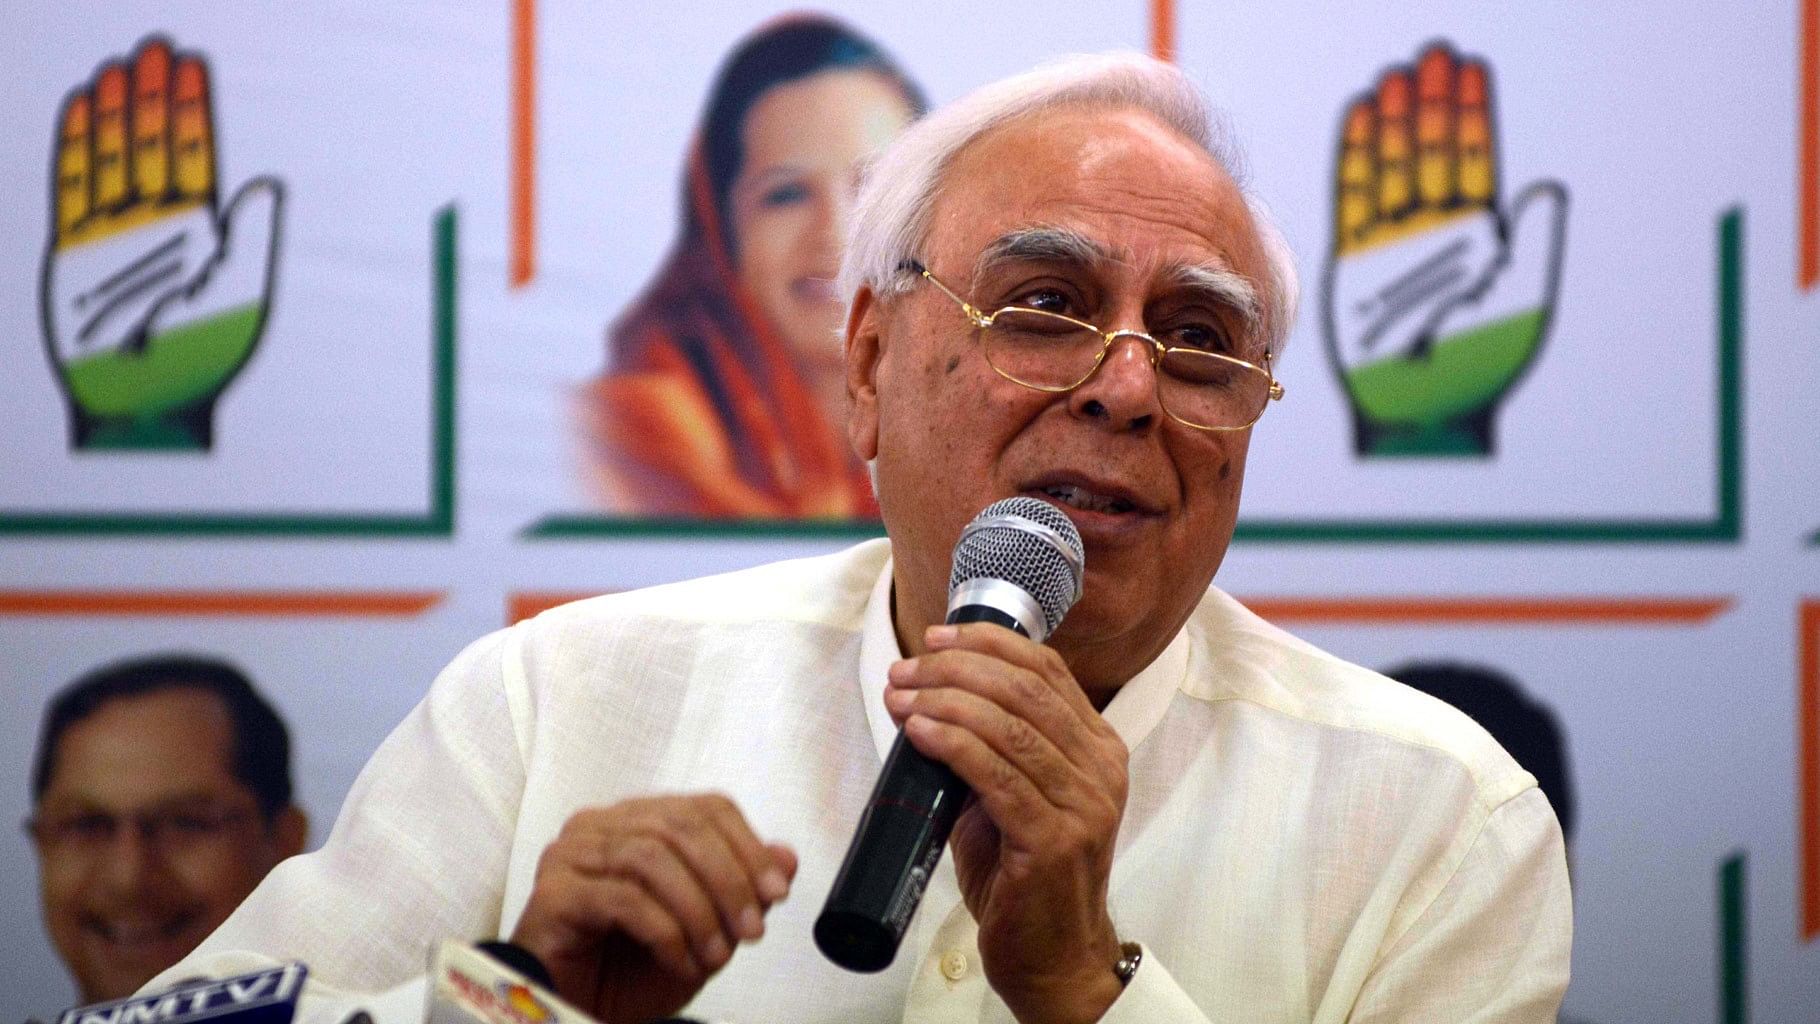 Congress MP Kapil Sibal pulled off a strategic move by withdrawing the challenge against Venkaiah Naidu’s rejection of the motion to impeach CJI Dipak Misra.